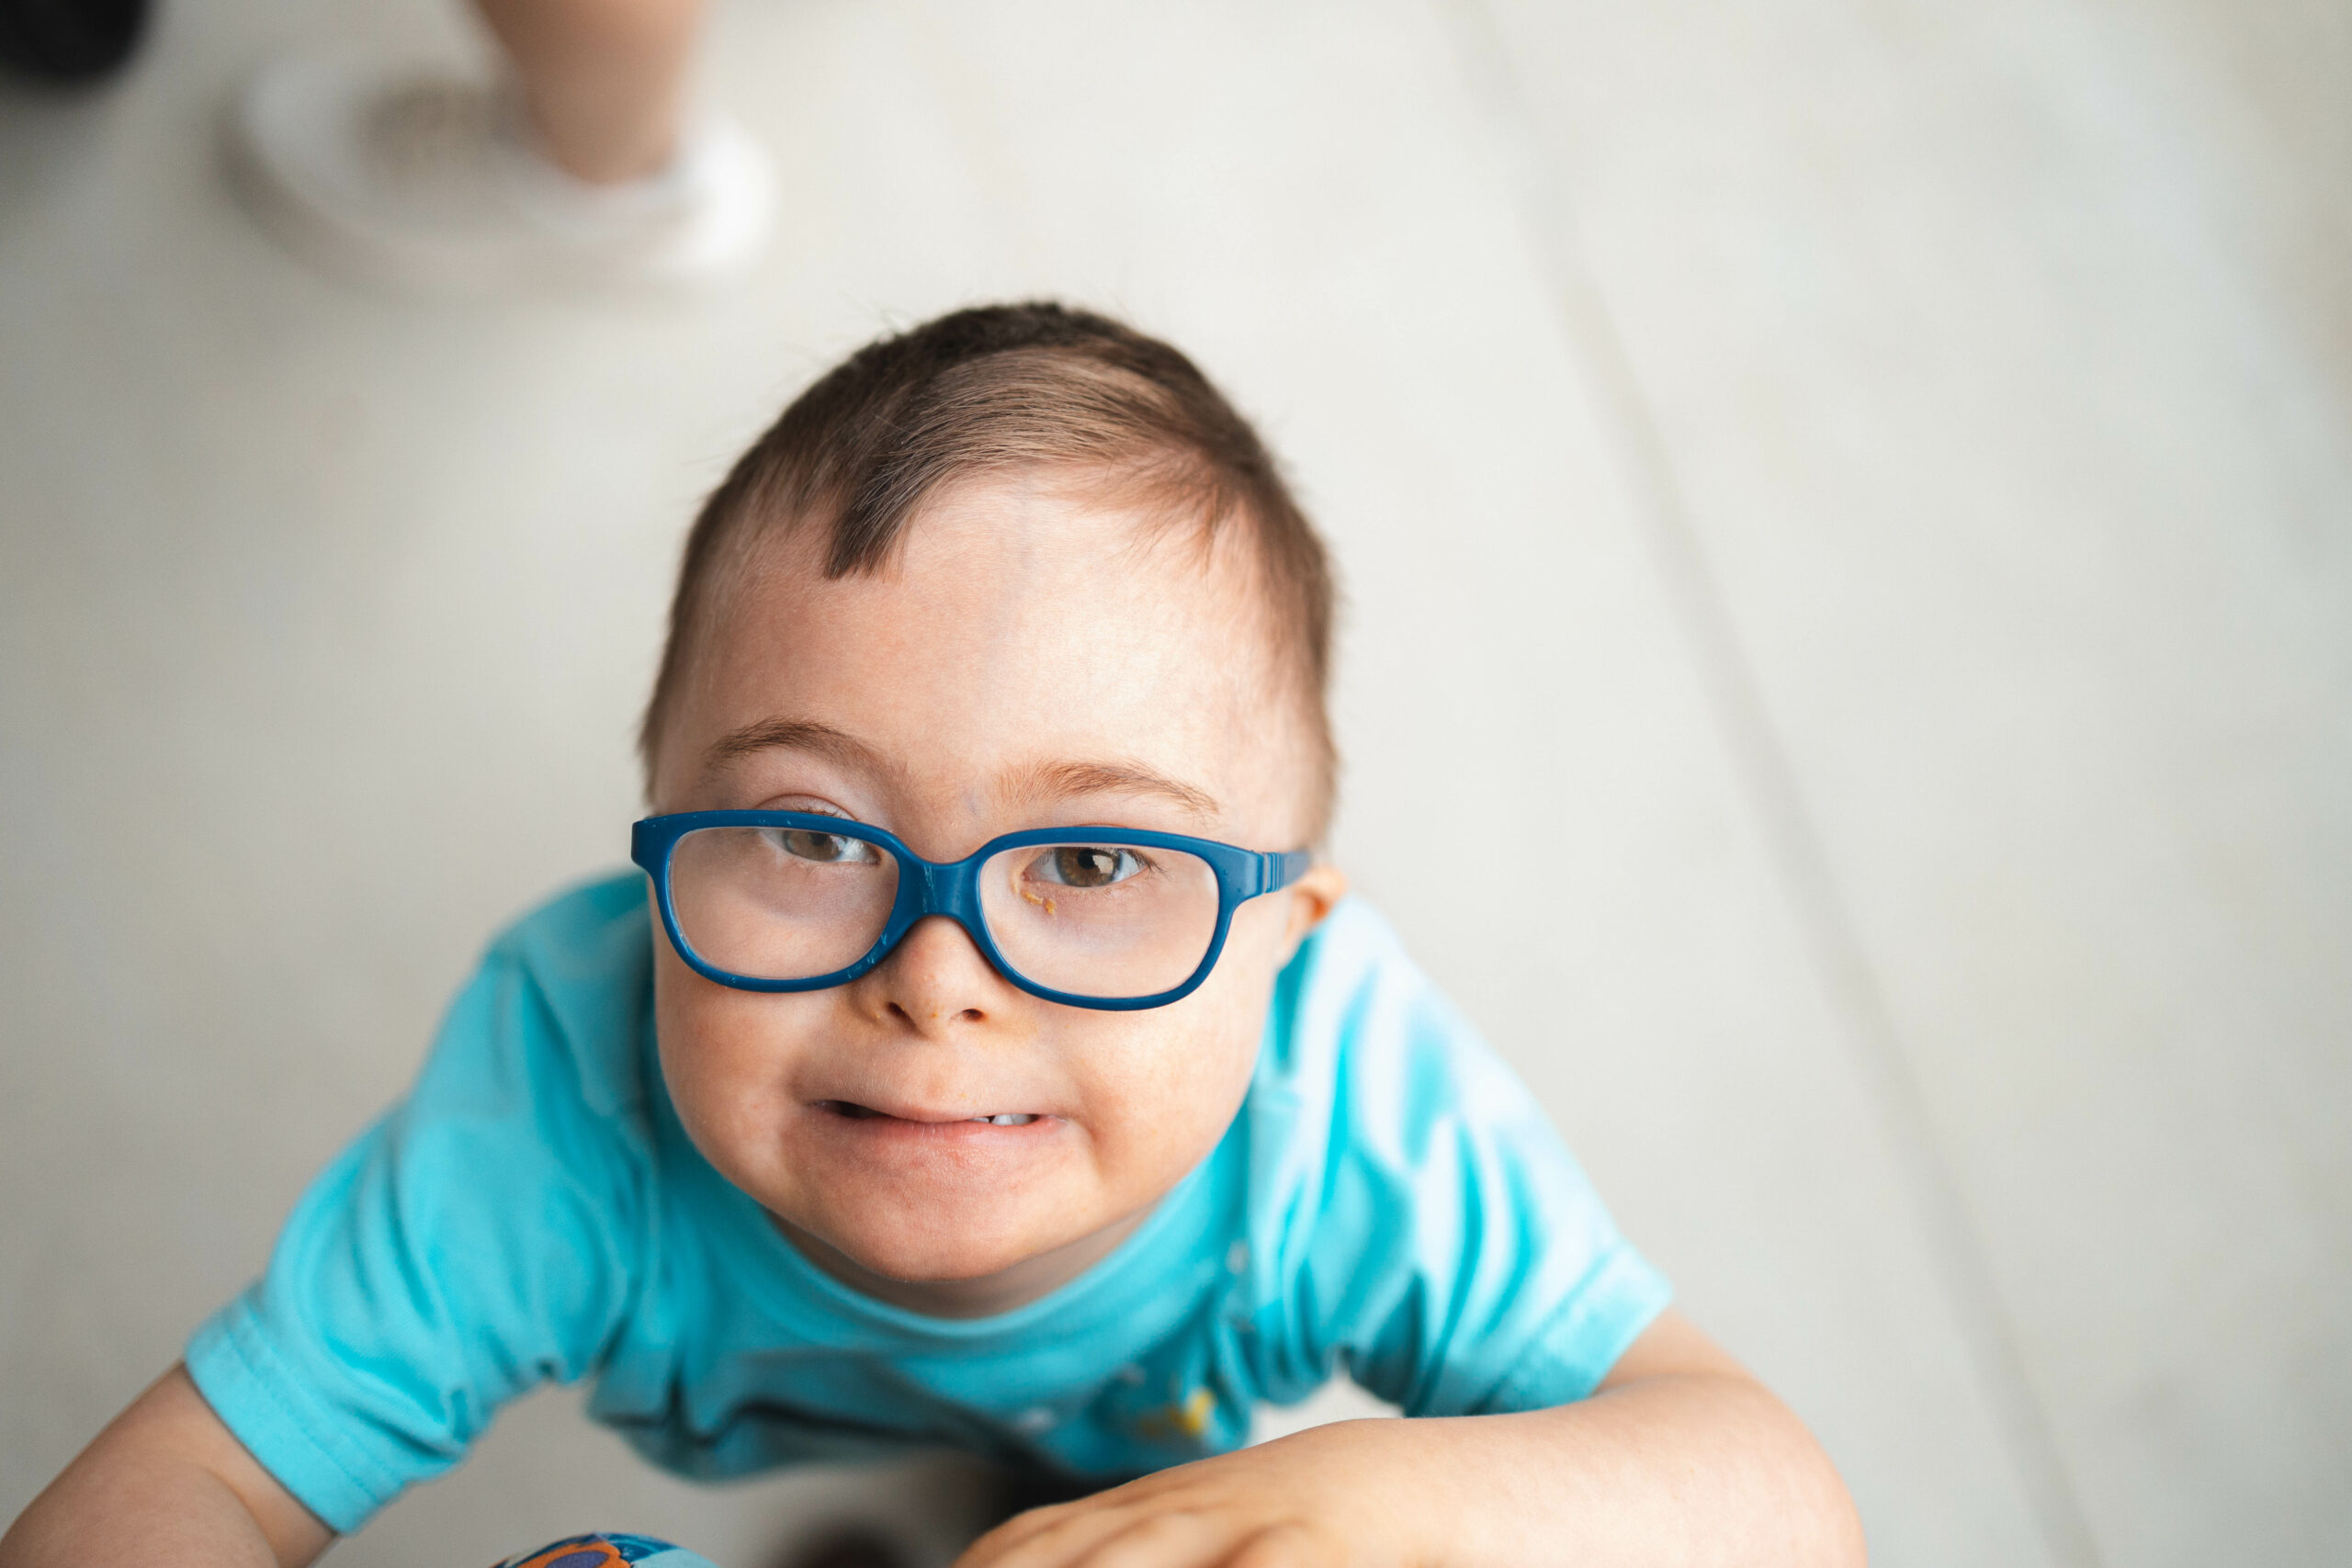 toddler with down syndrome wearing glasses for a visual impairment